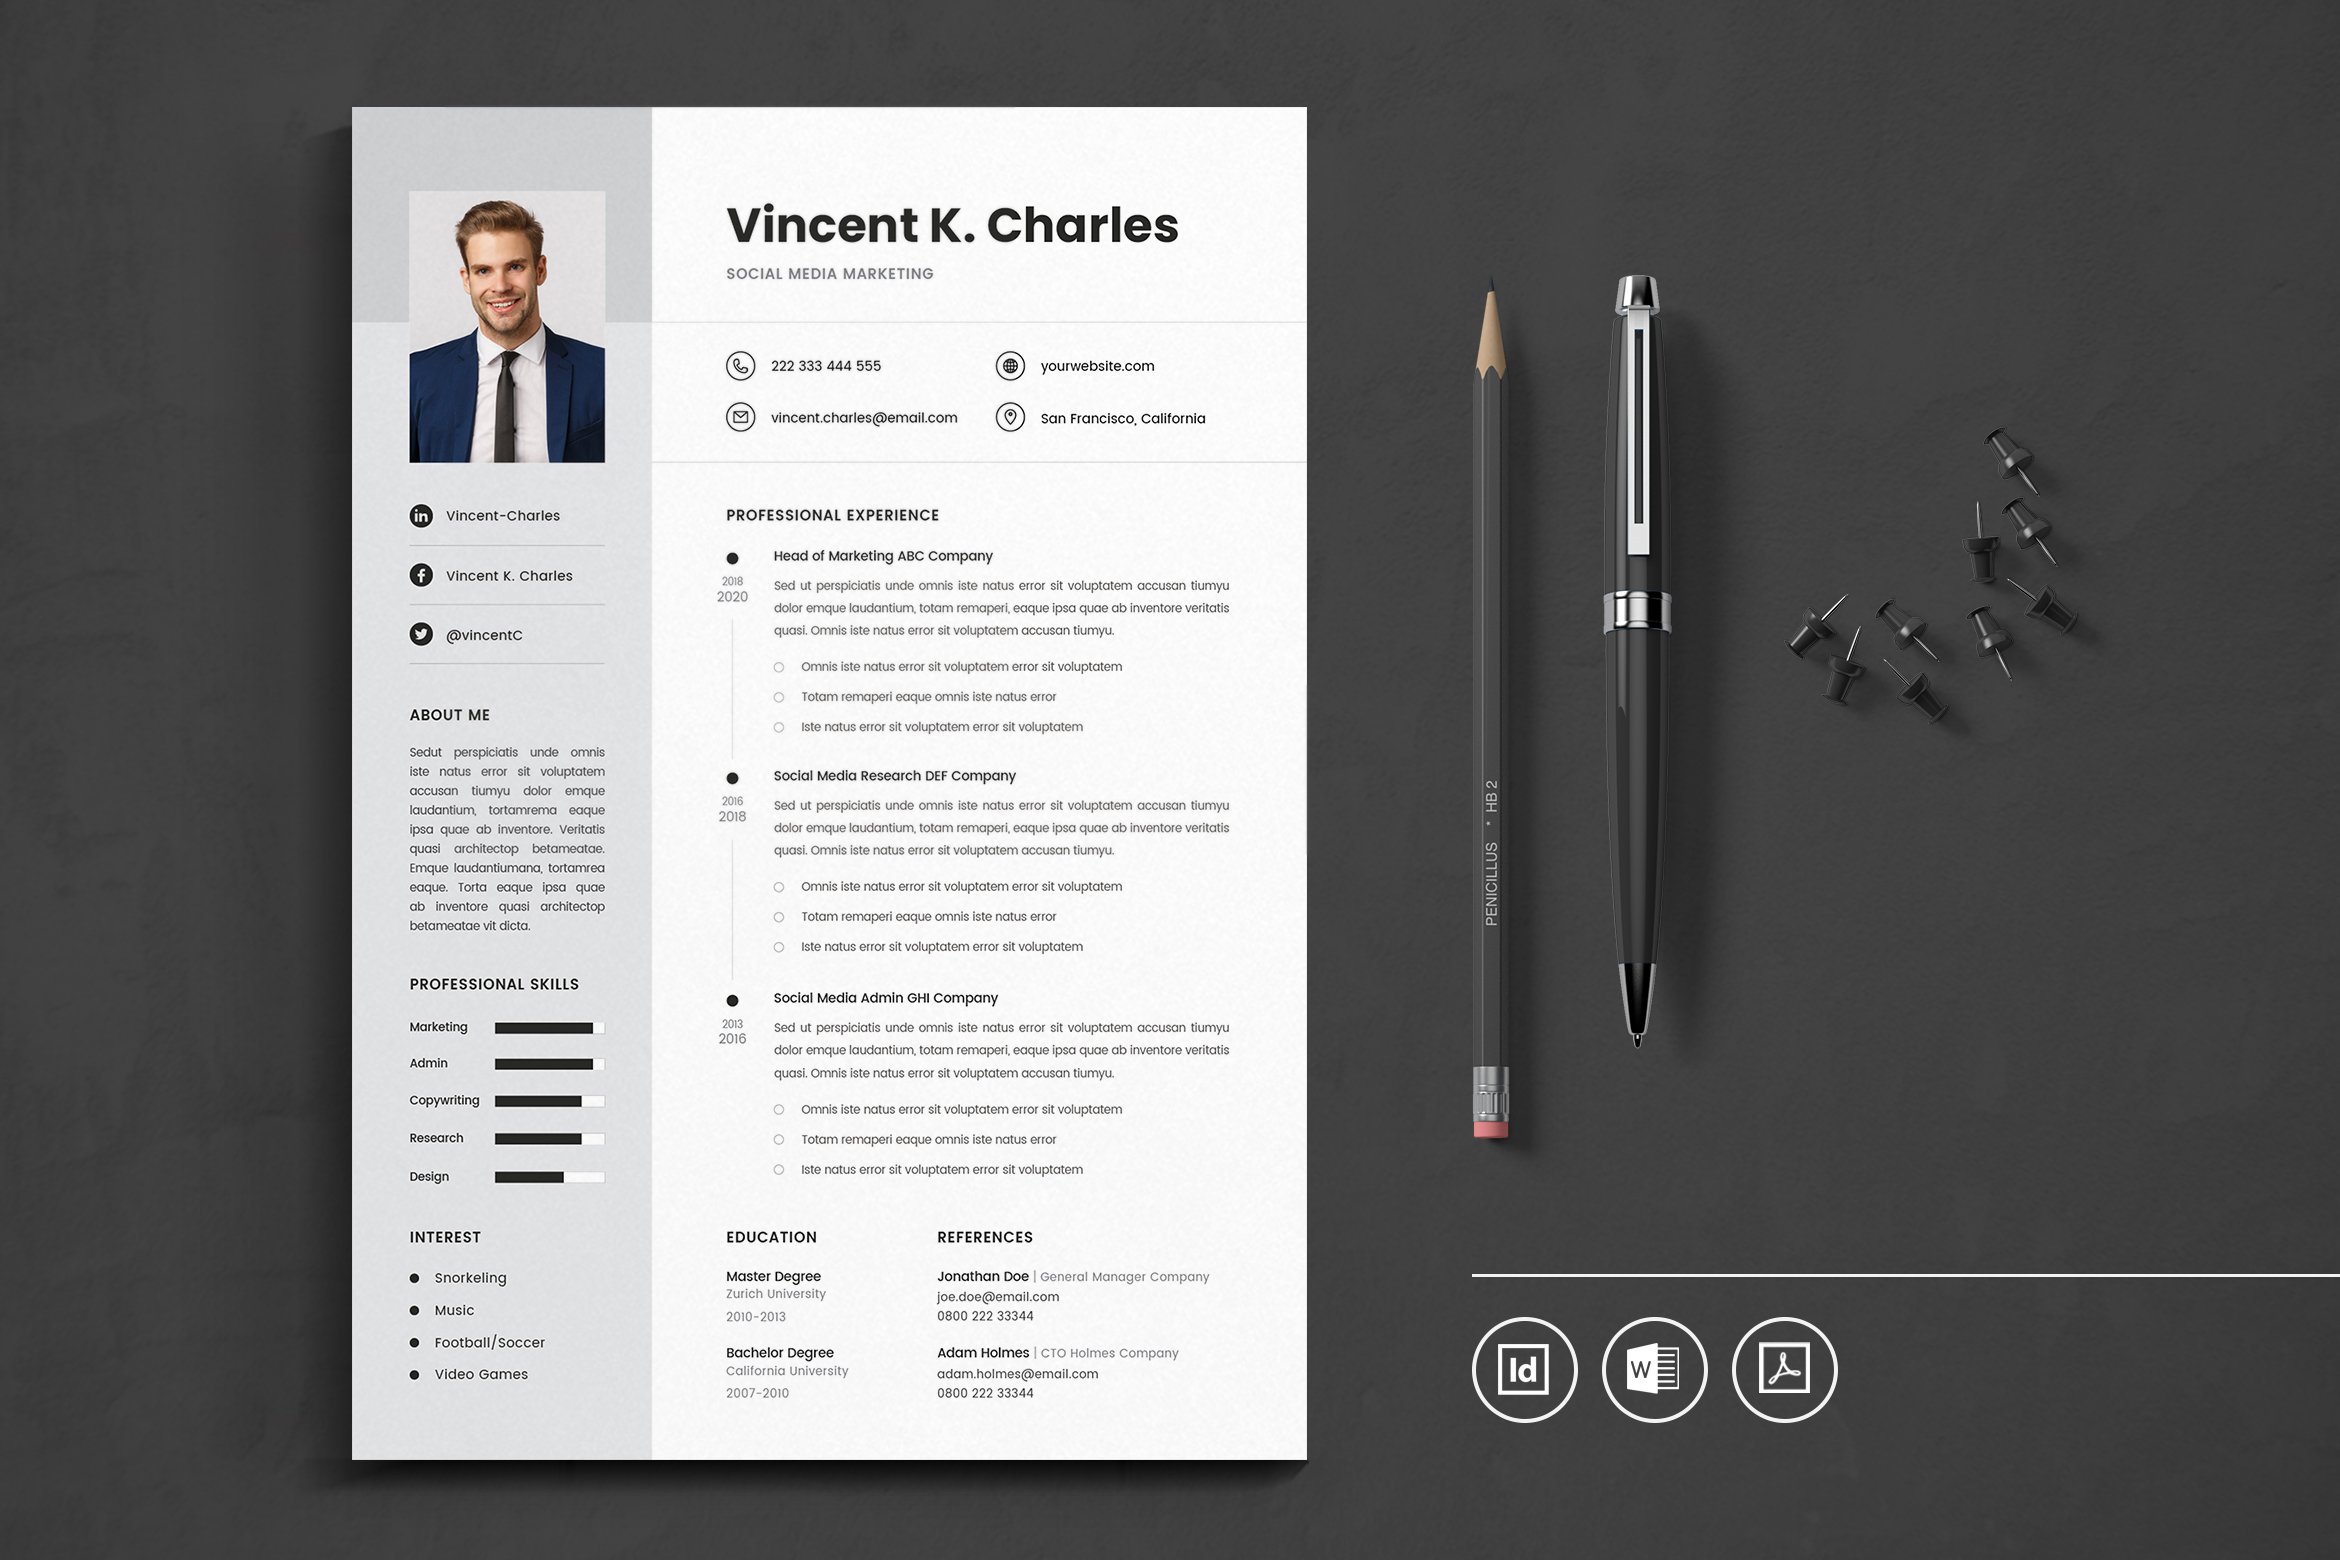 Classic resume with the cool design.